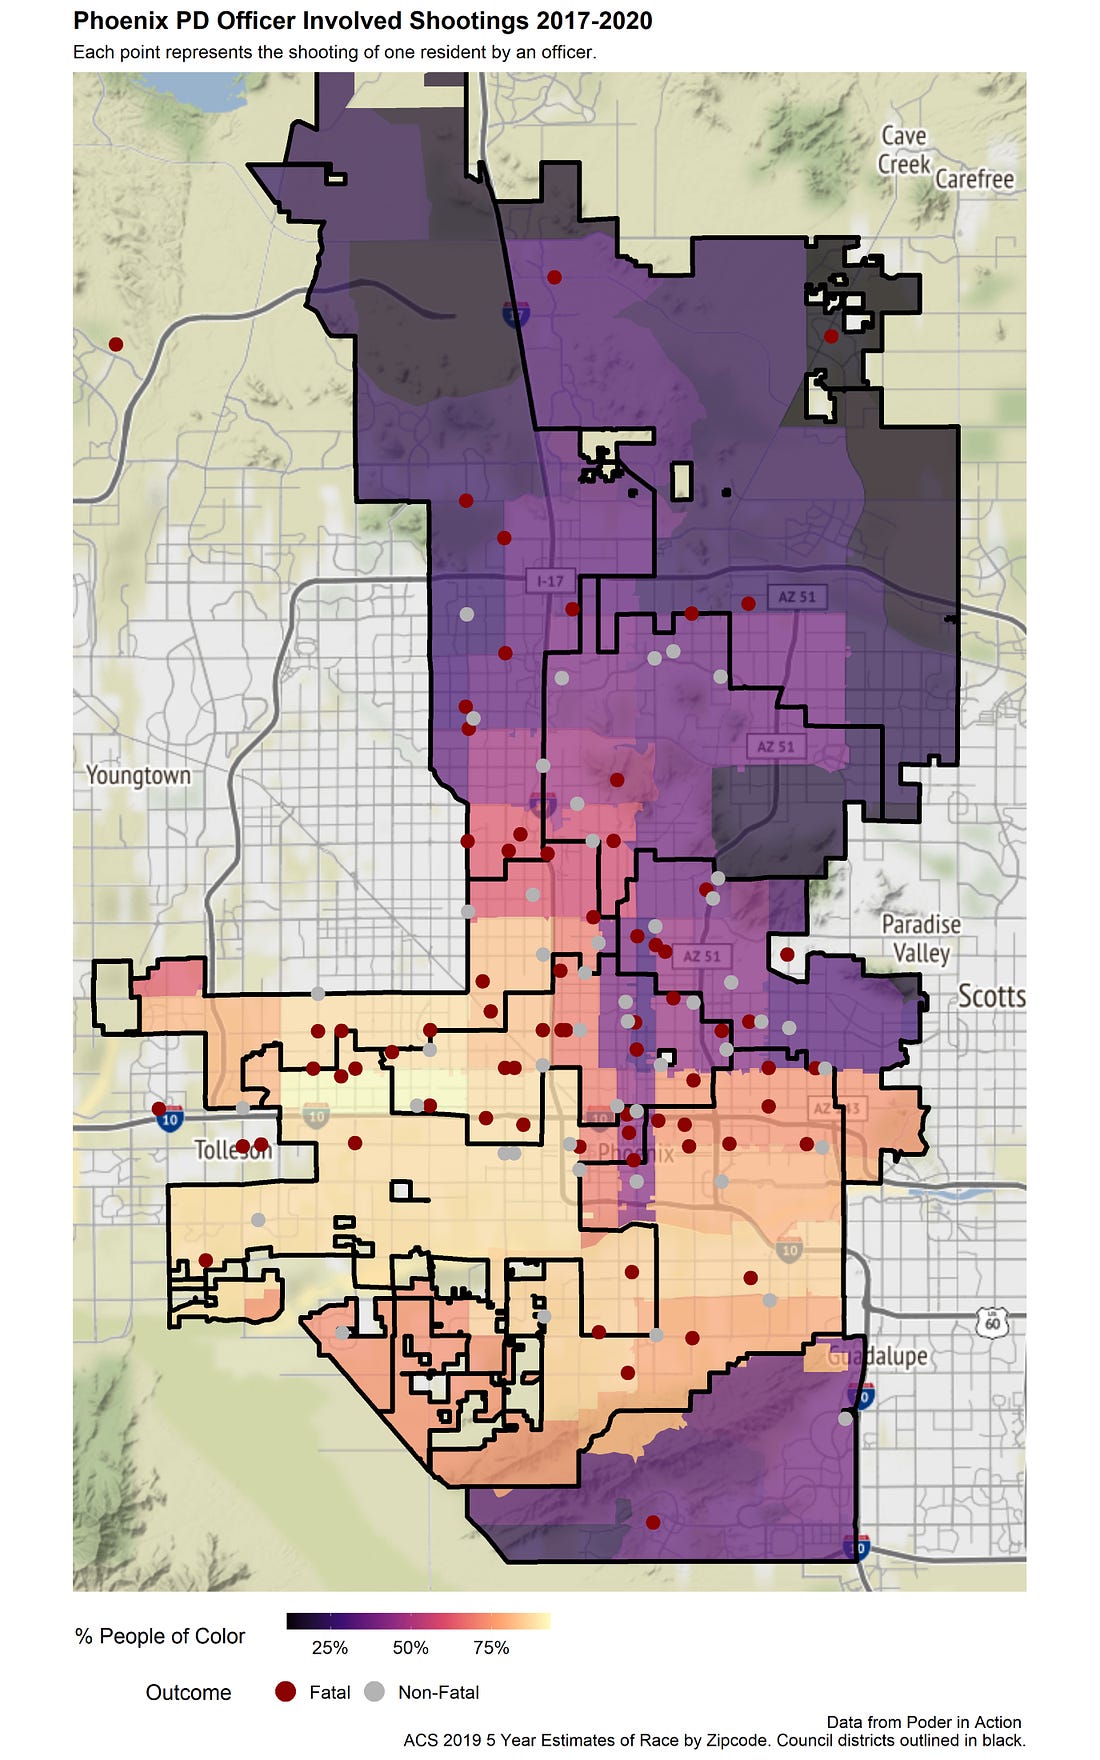 Mapping OIS shootings and communities of color in Phoenix